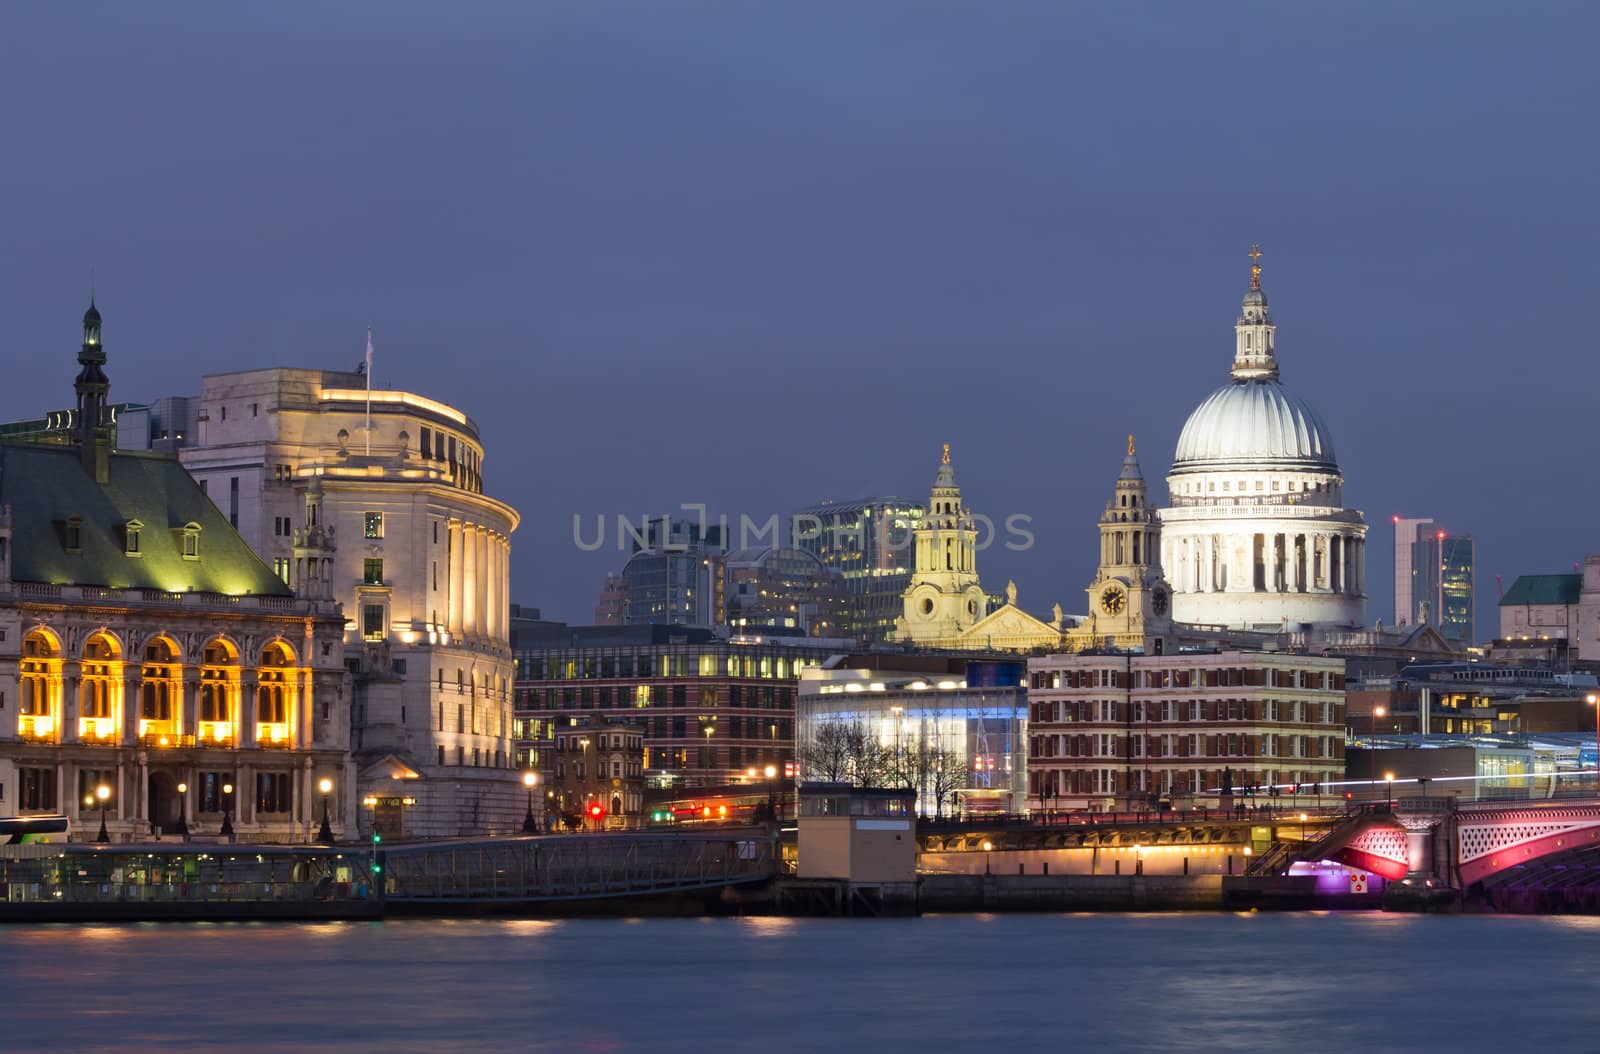 Evening view of the Thames and St Paul's Cathedral. London by Antartis